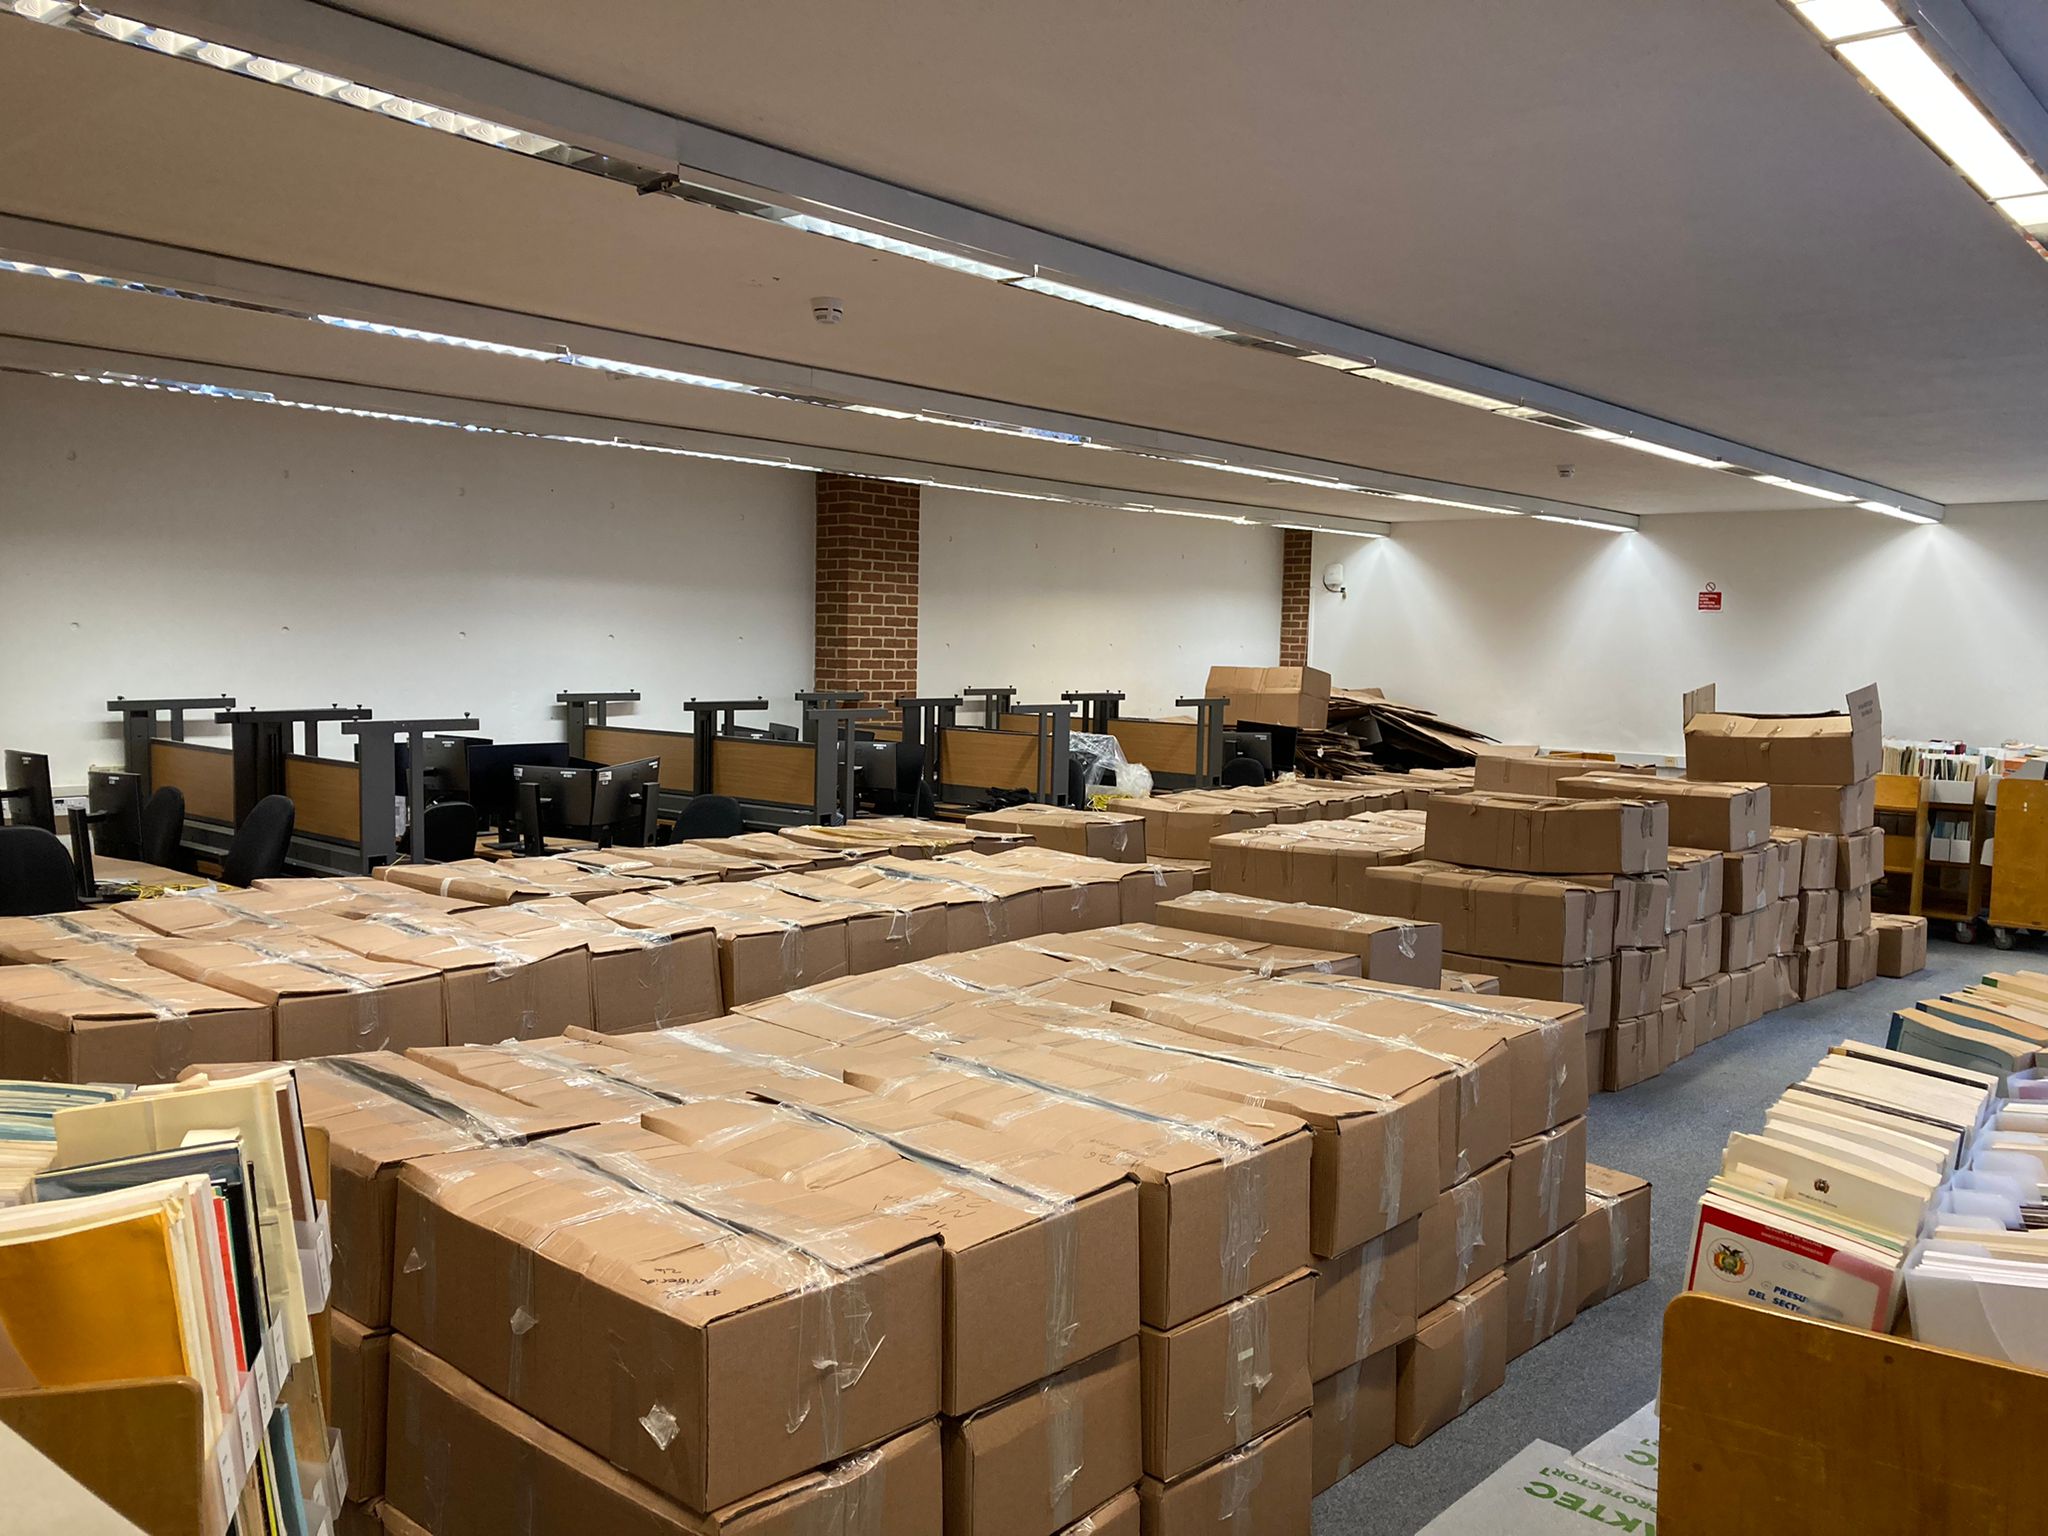 Room full of large cardboard boxes